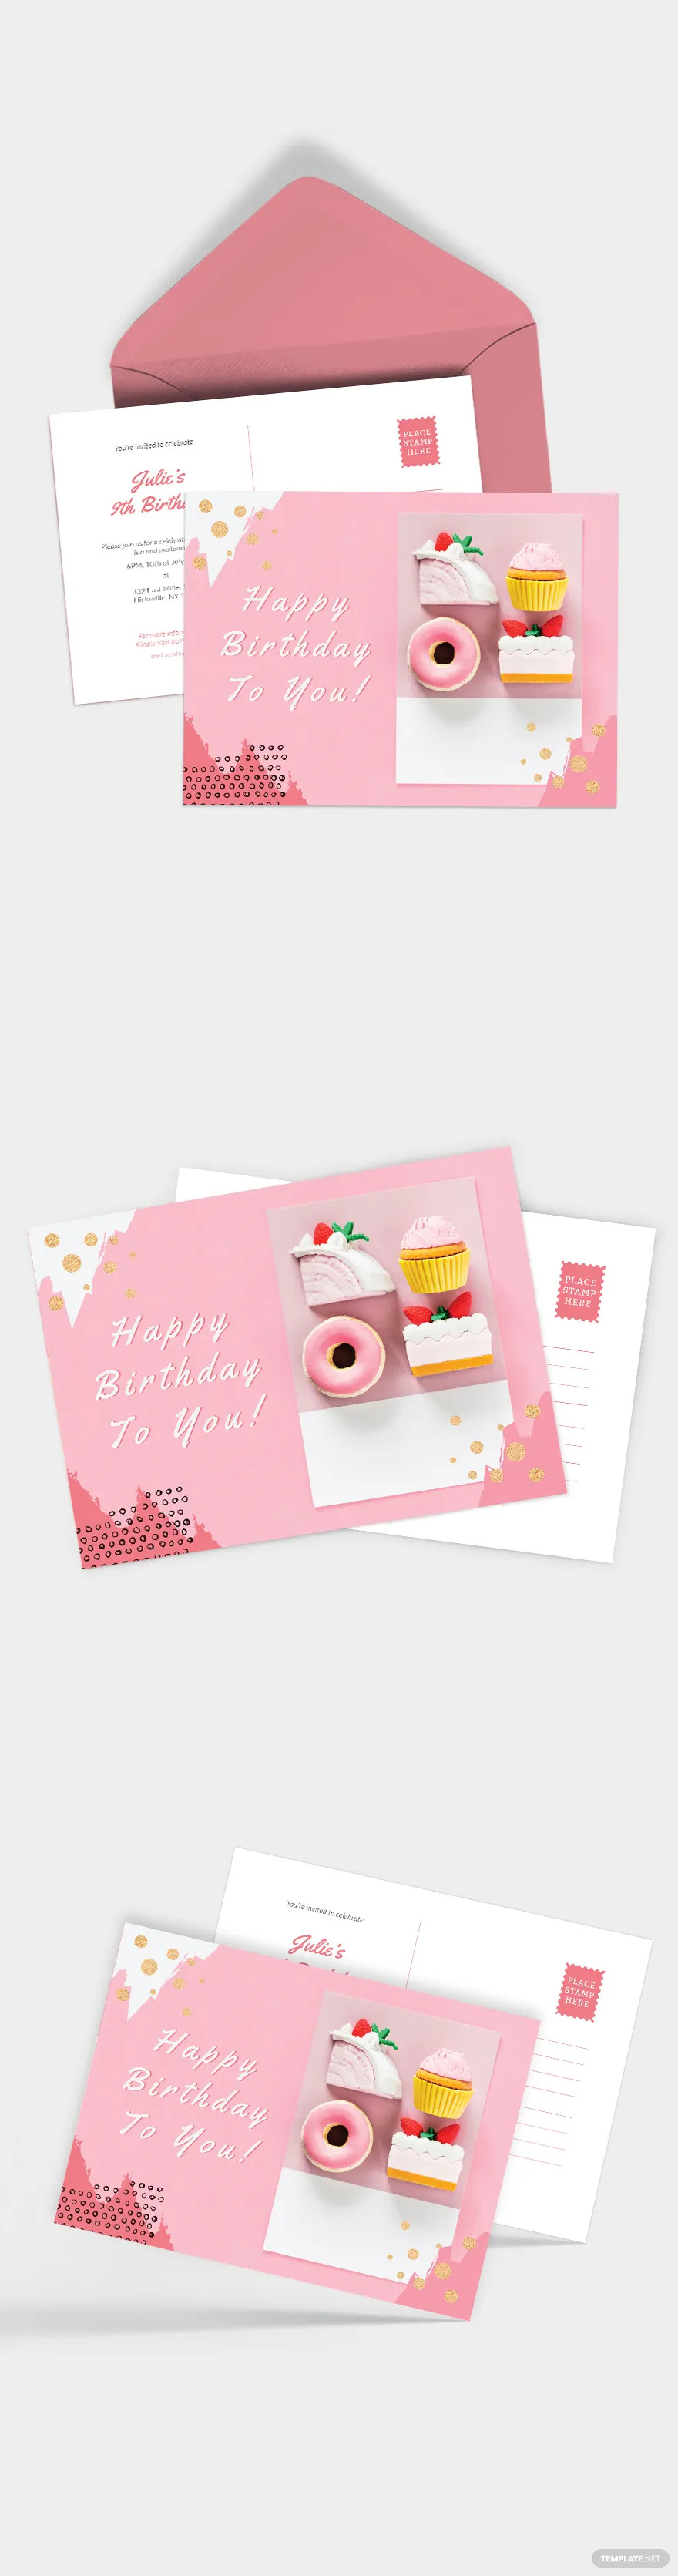 postcard-ideas-for-birthday-examples